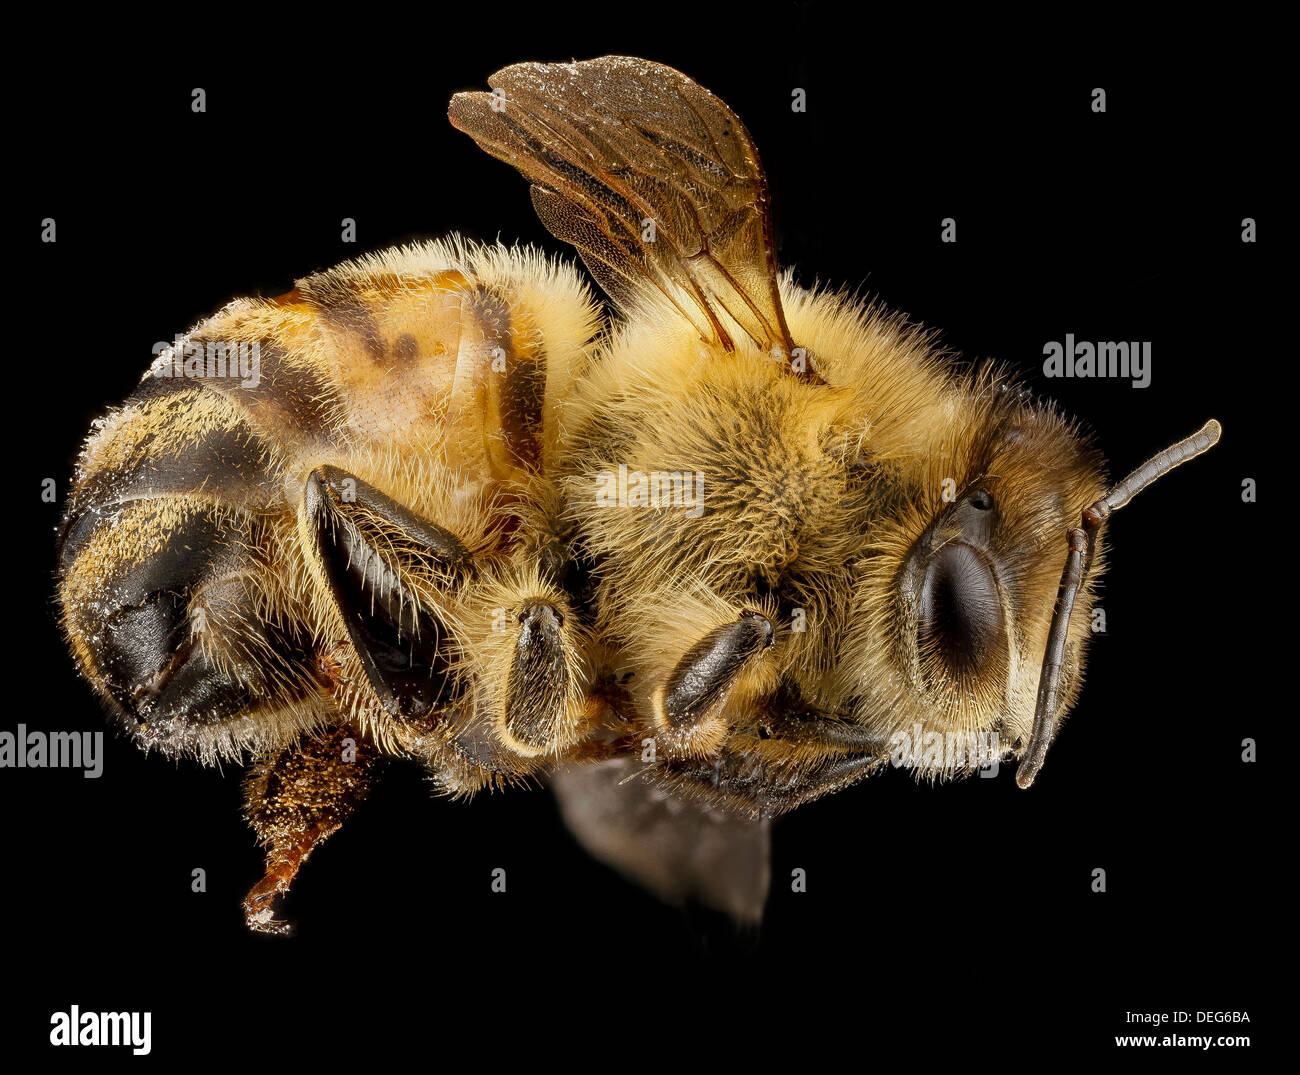 Macro view of a European honey bee, Apis mellifera, note the hairs coming off the compound eyes a distinctive honey bee trait compared to native bees. Stock Photo